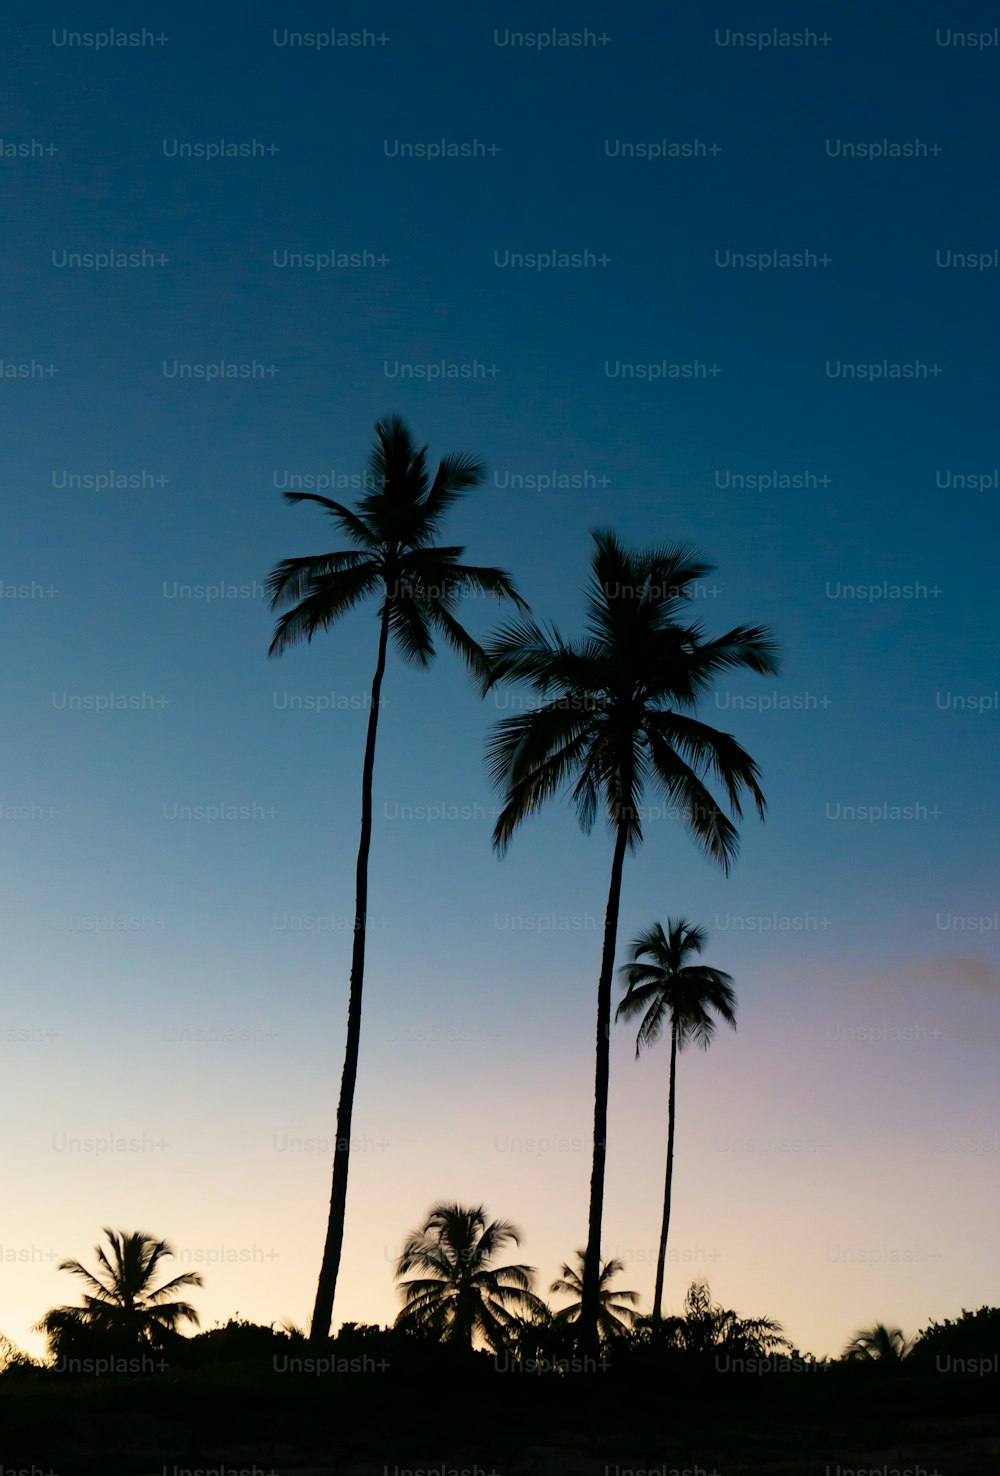 three palm trees are silhouetted against a twilight sky